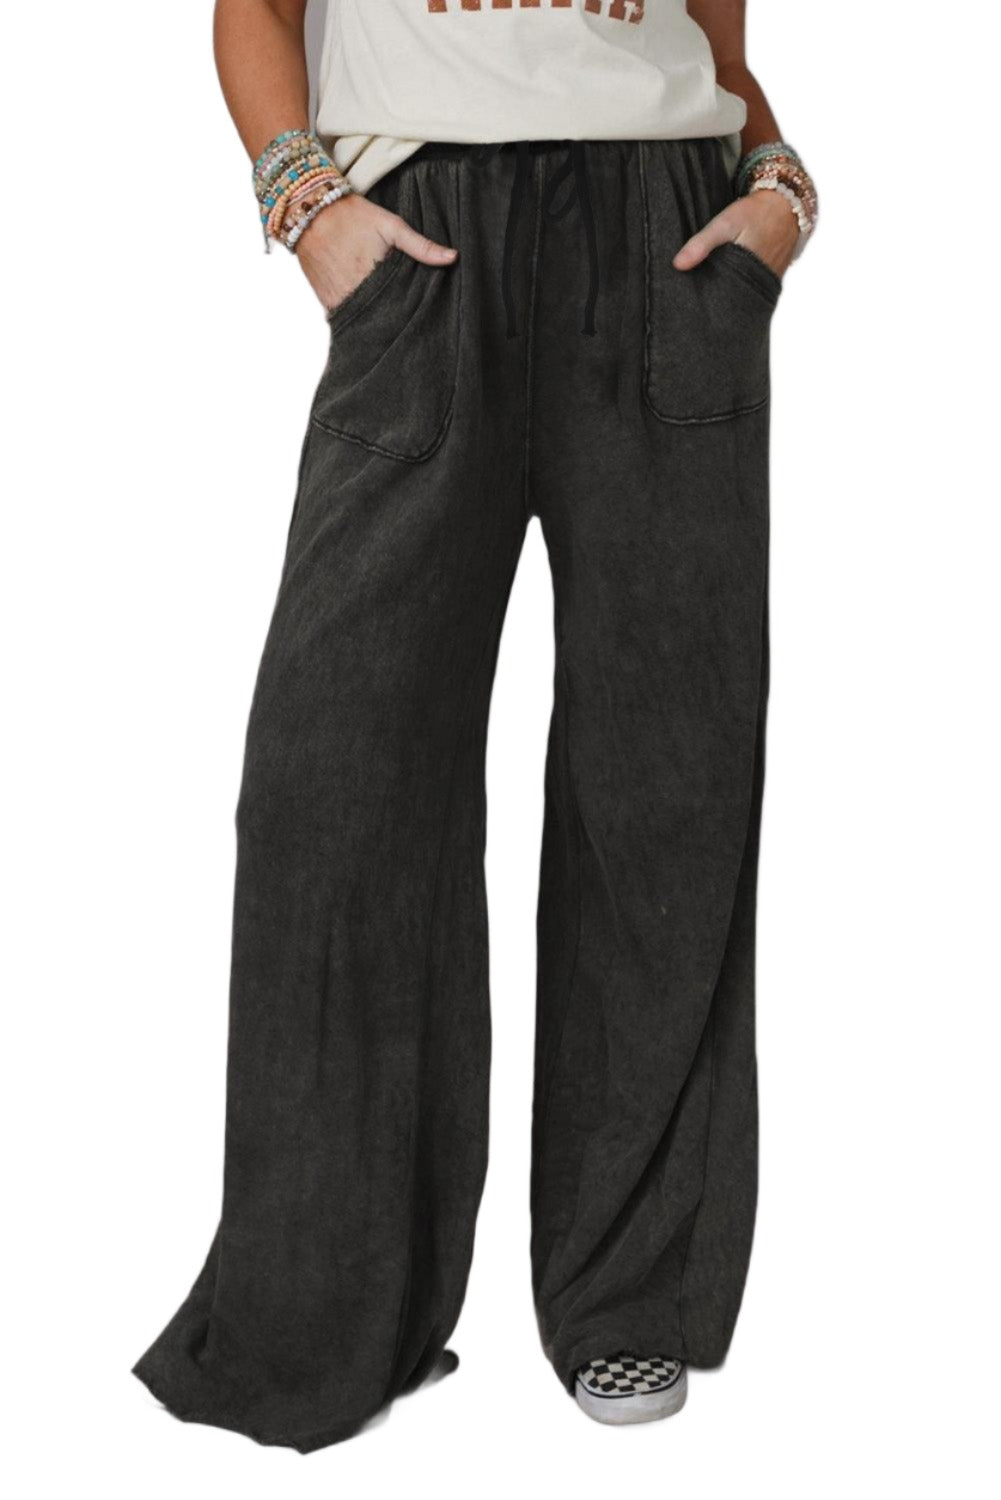 Women's Activewear Wide Leg Pocketed Pants